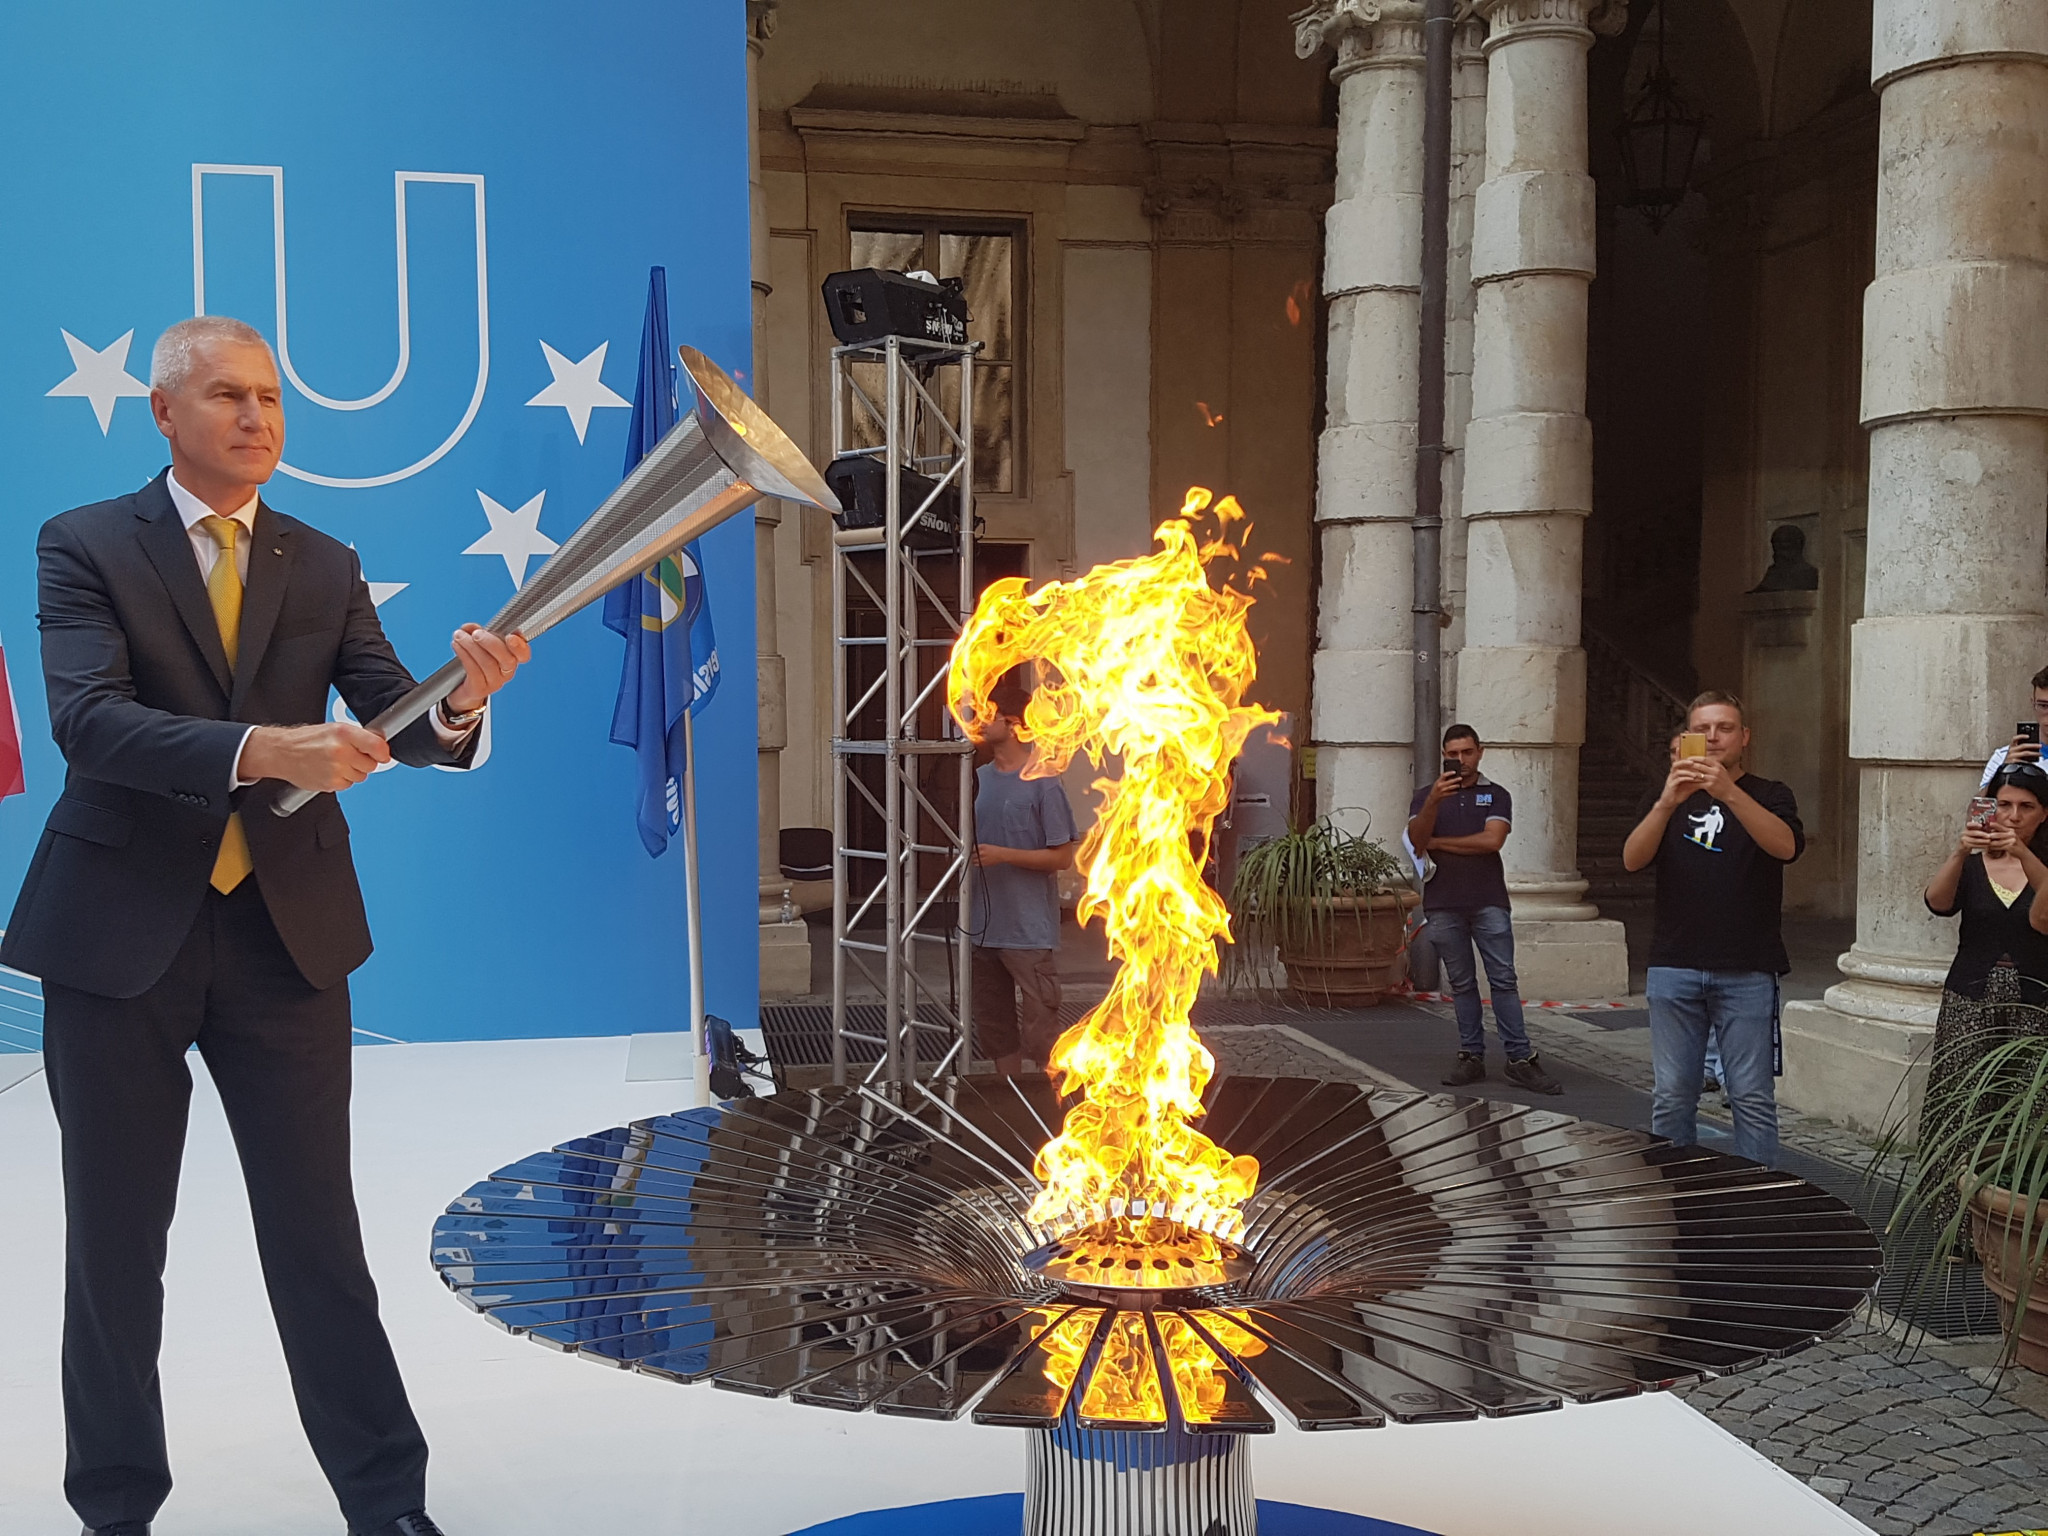 The Torch for Krasnoyarsk 2019 was lit at a special ceremony in Turin on Thursday ©FISU